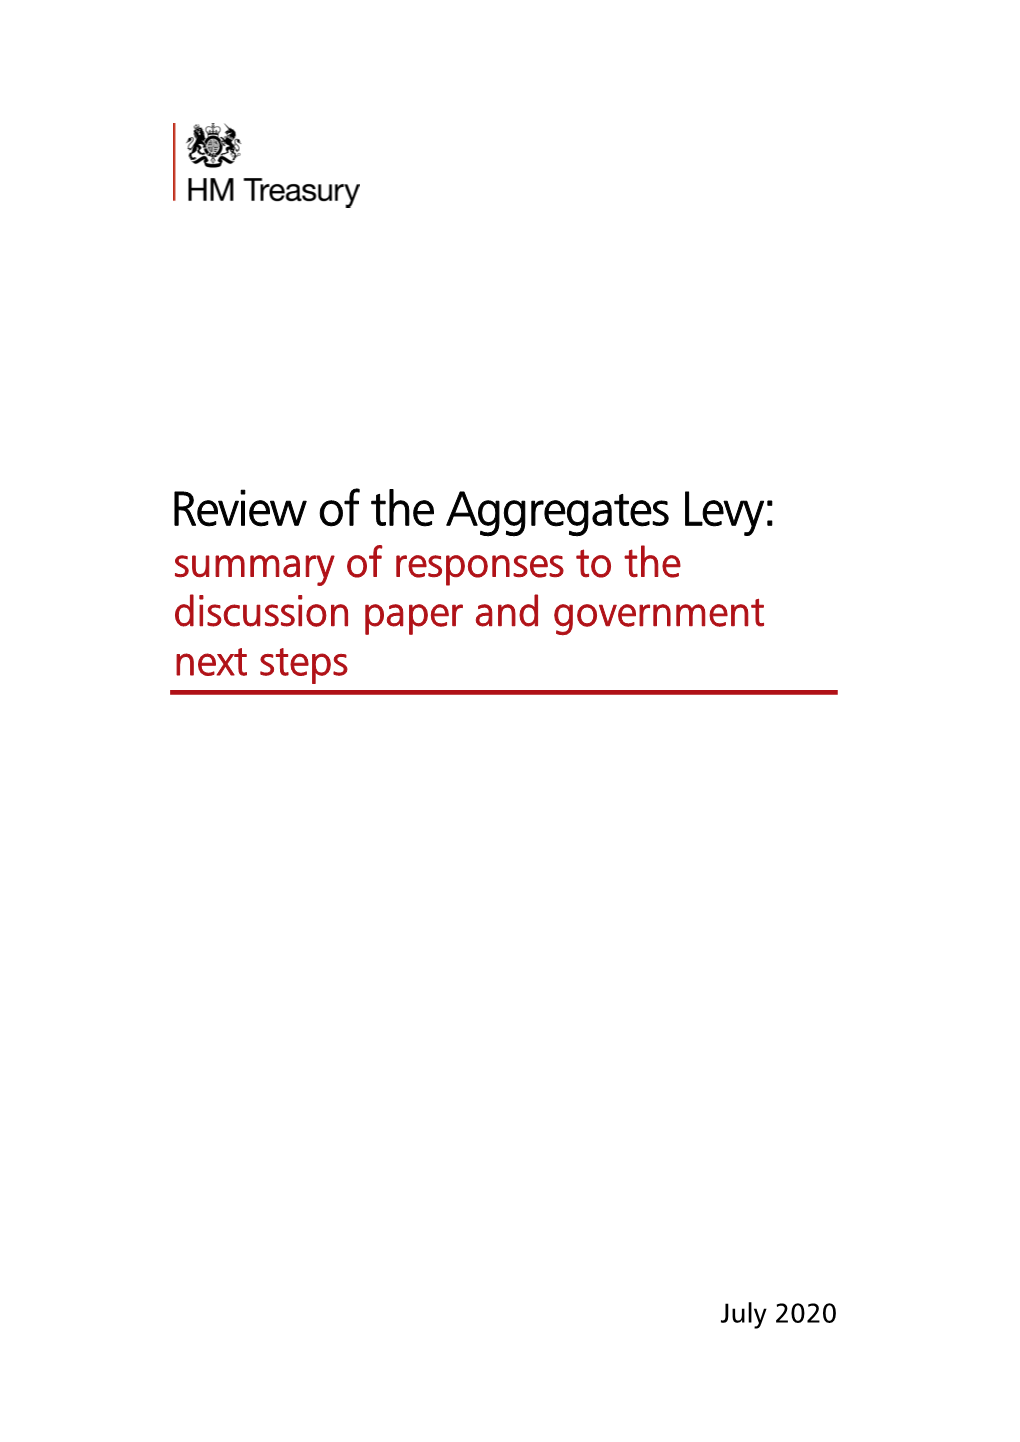 Review of the Aggregates Levy: Summary of Responses to the Discussion Paper and Government Next Steps